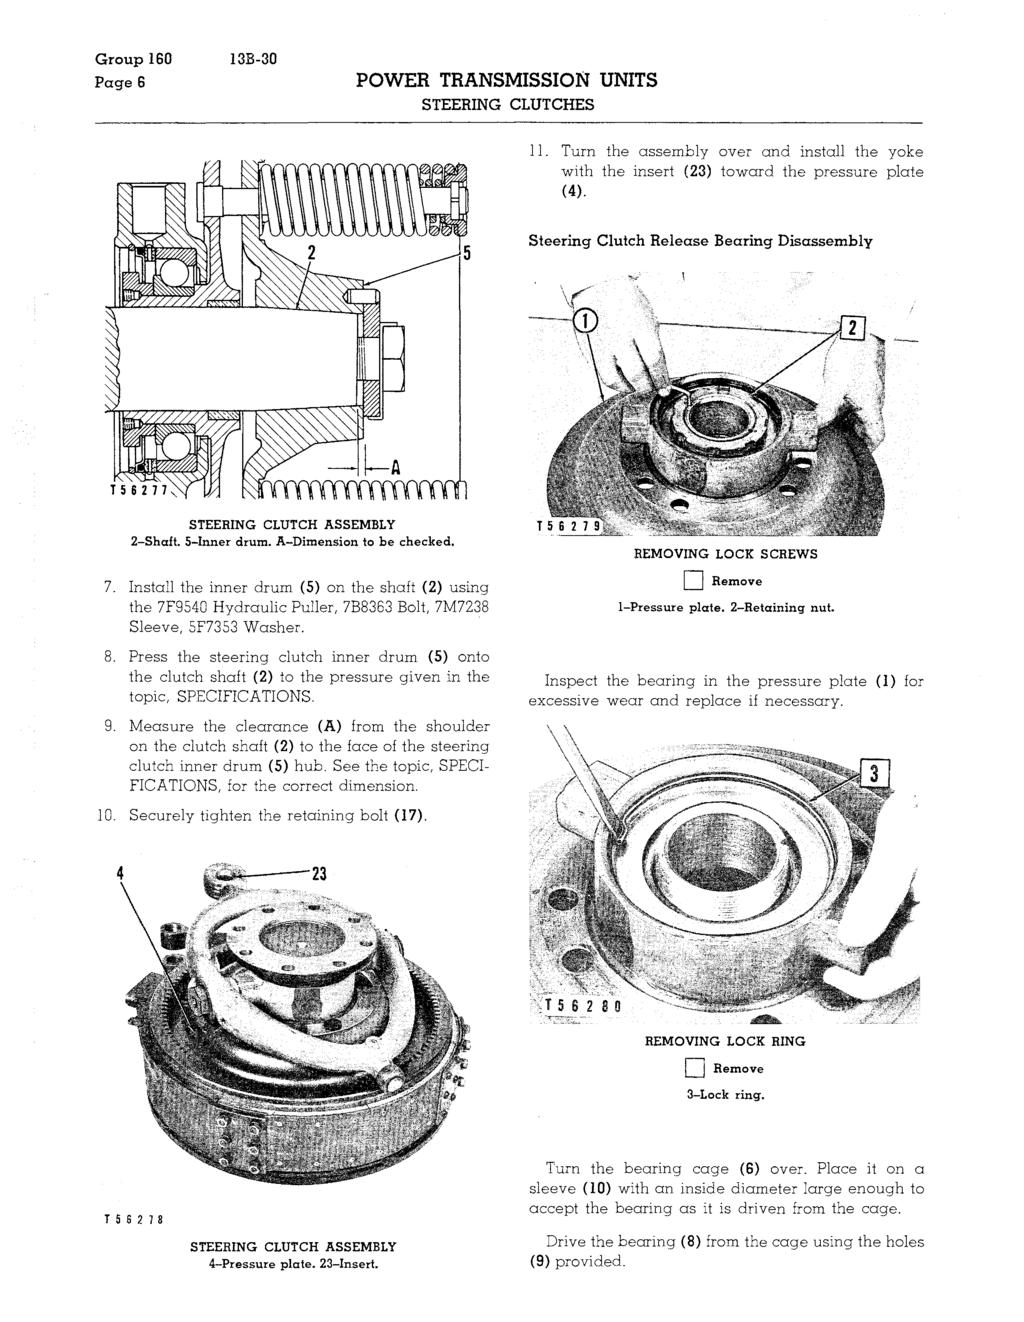 Group 160 Page 6 POWER TRANSMISSION UNITS STEERING CLUTCHES 11. Turn the assembly over and install the yoke with the insert (23) toward the pressure plate (4).